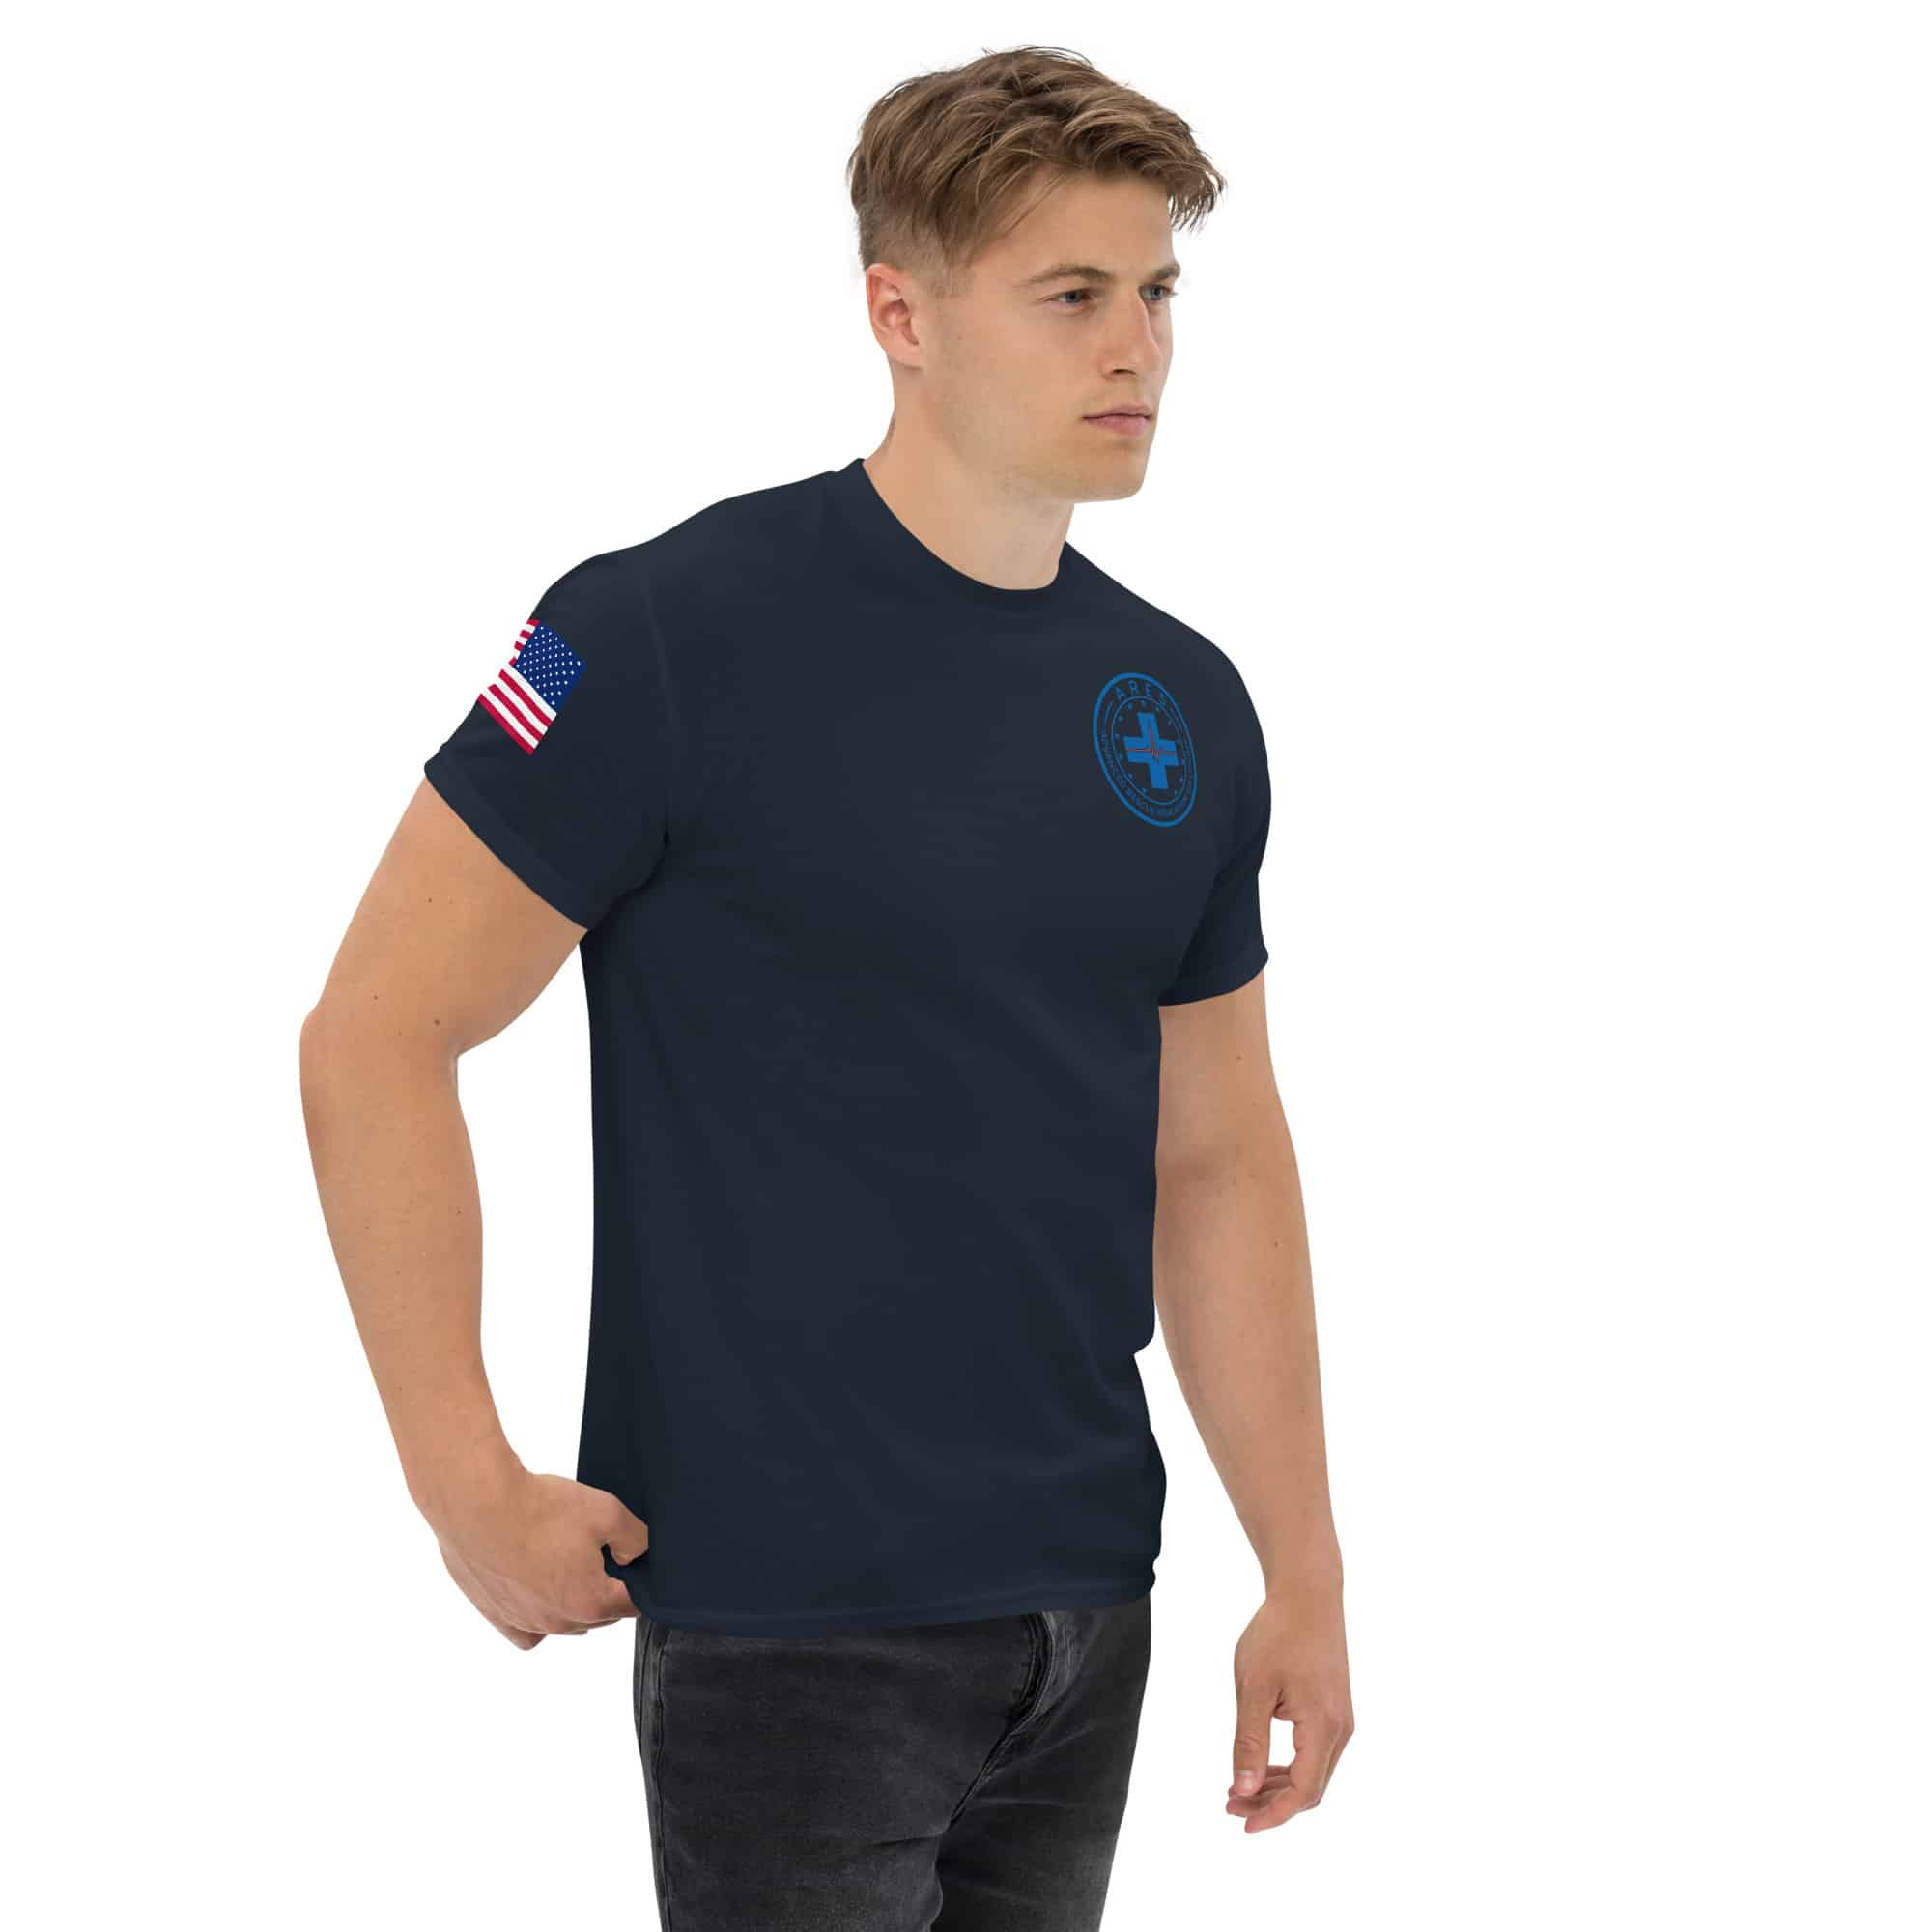 ARES EMS Student Shirt - ARES Education